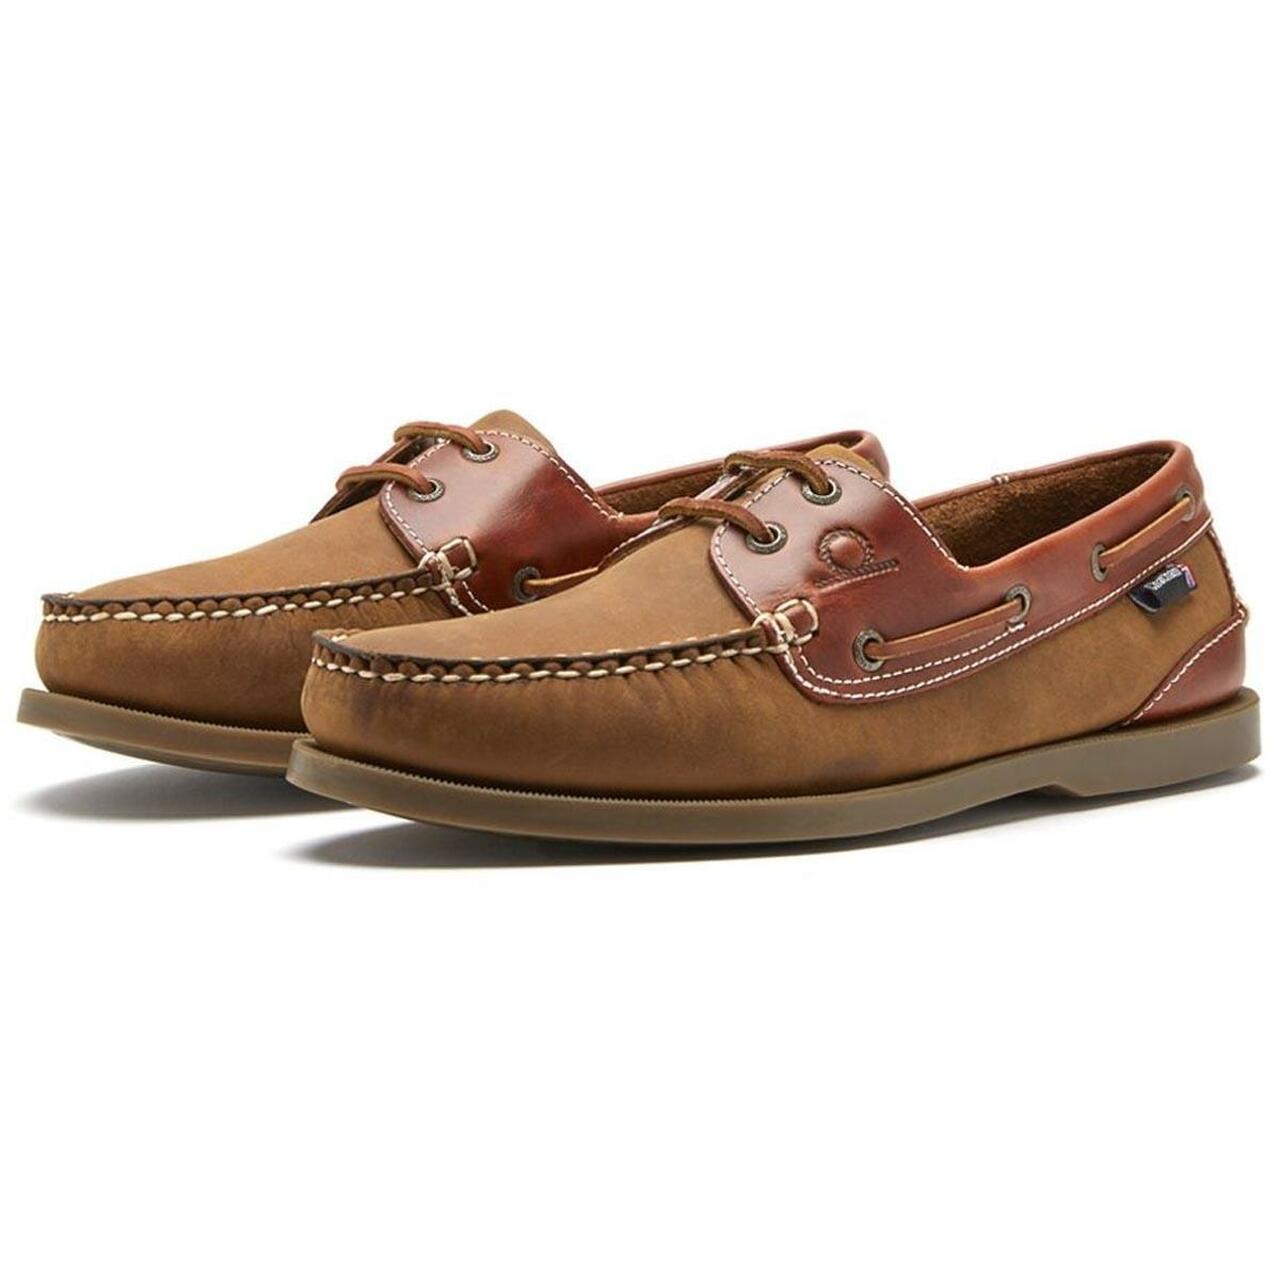 CHATHAM Ladies Bermuda G2 Leather Boat Shoes - Walnut/Brown Snake – A Farley